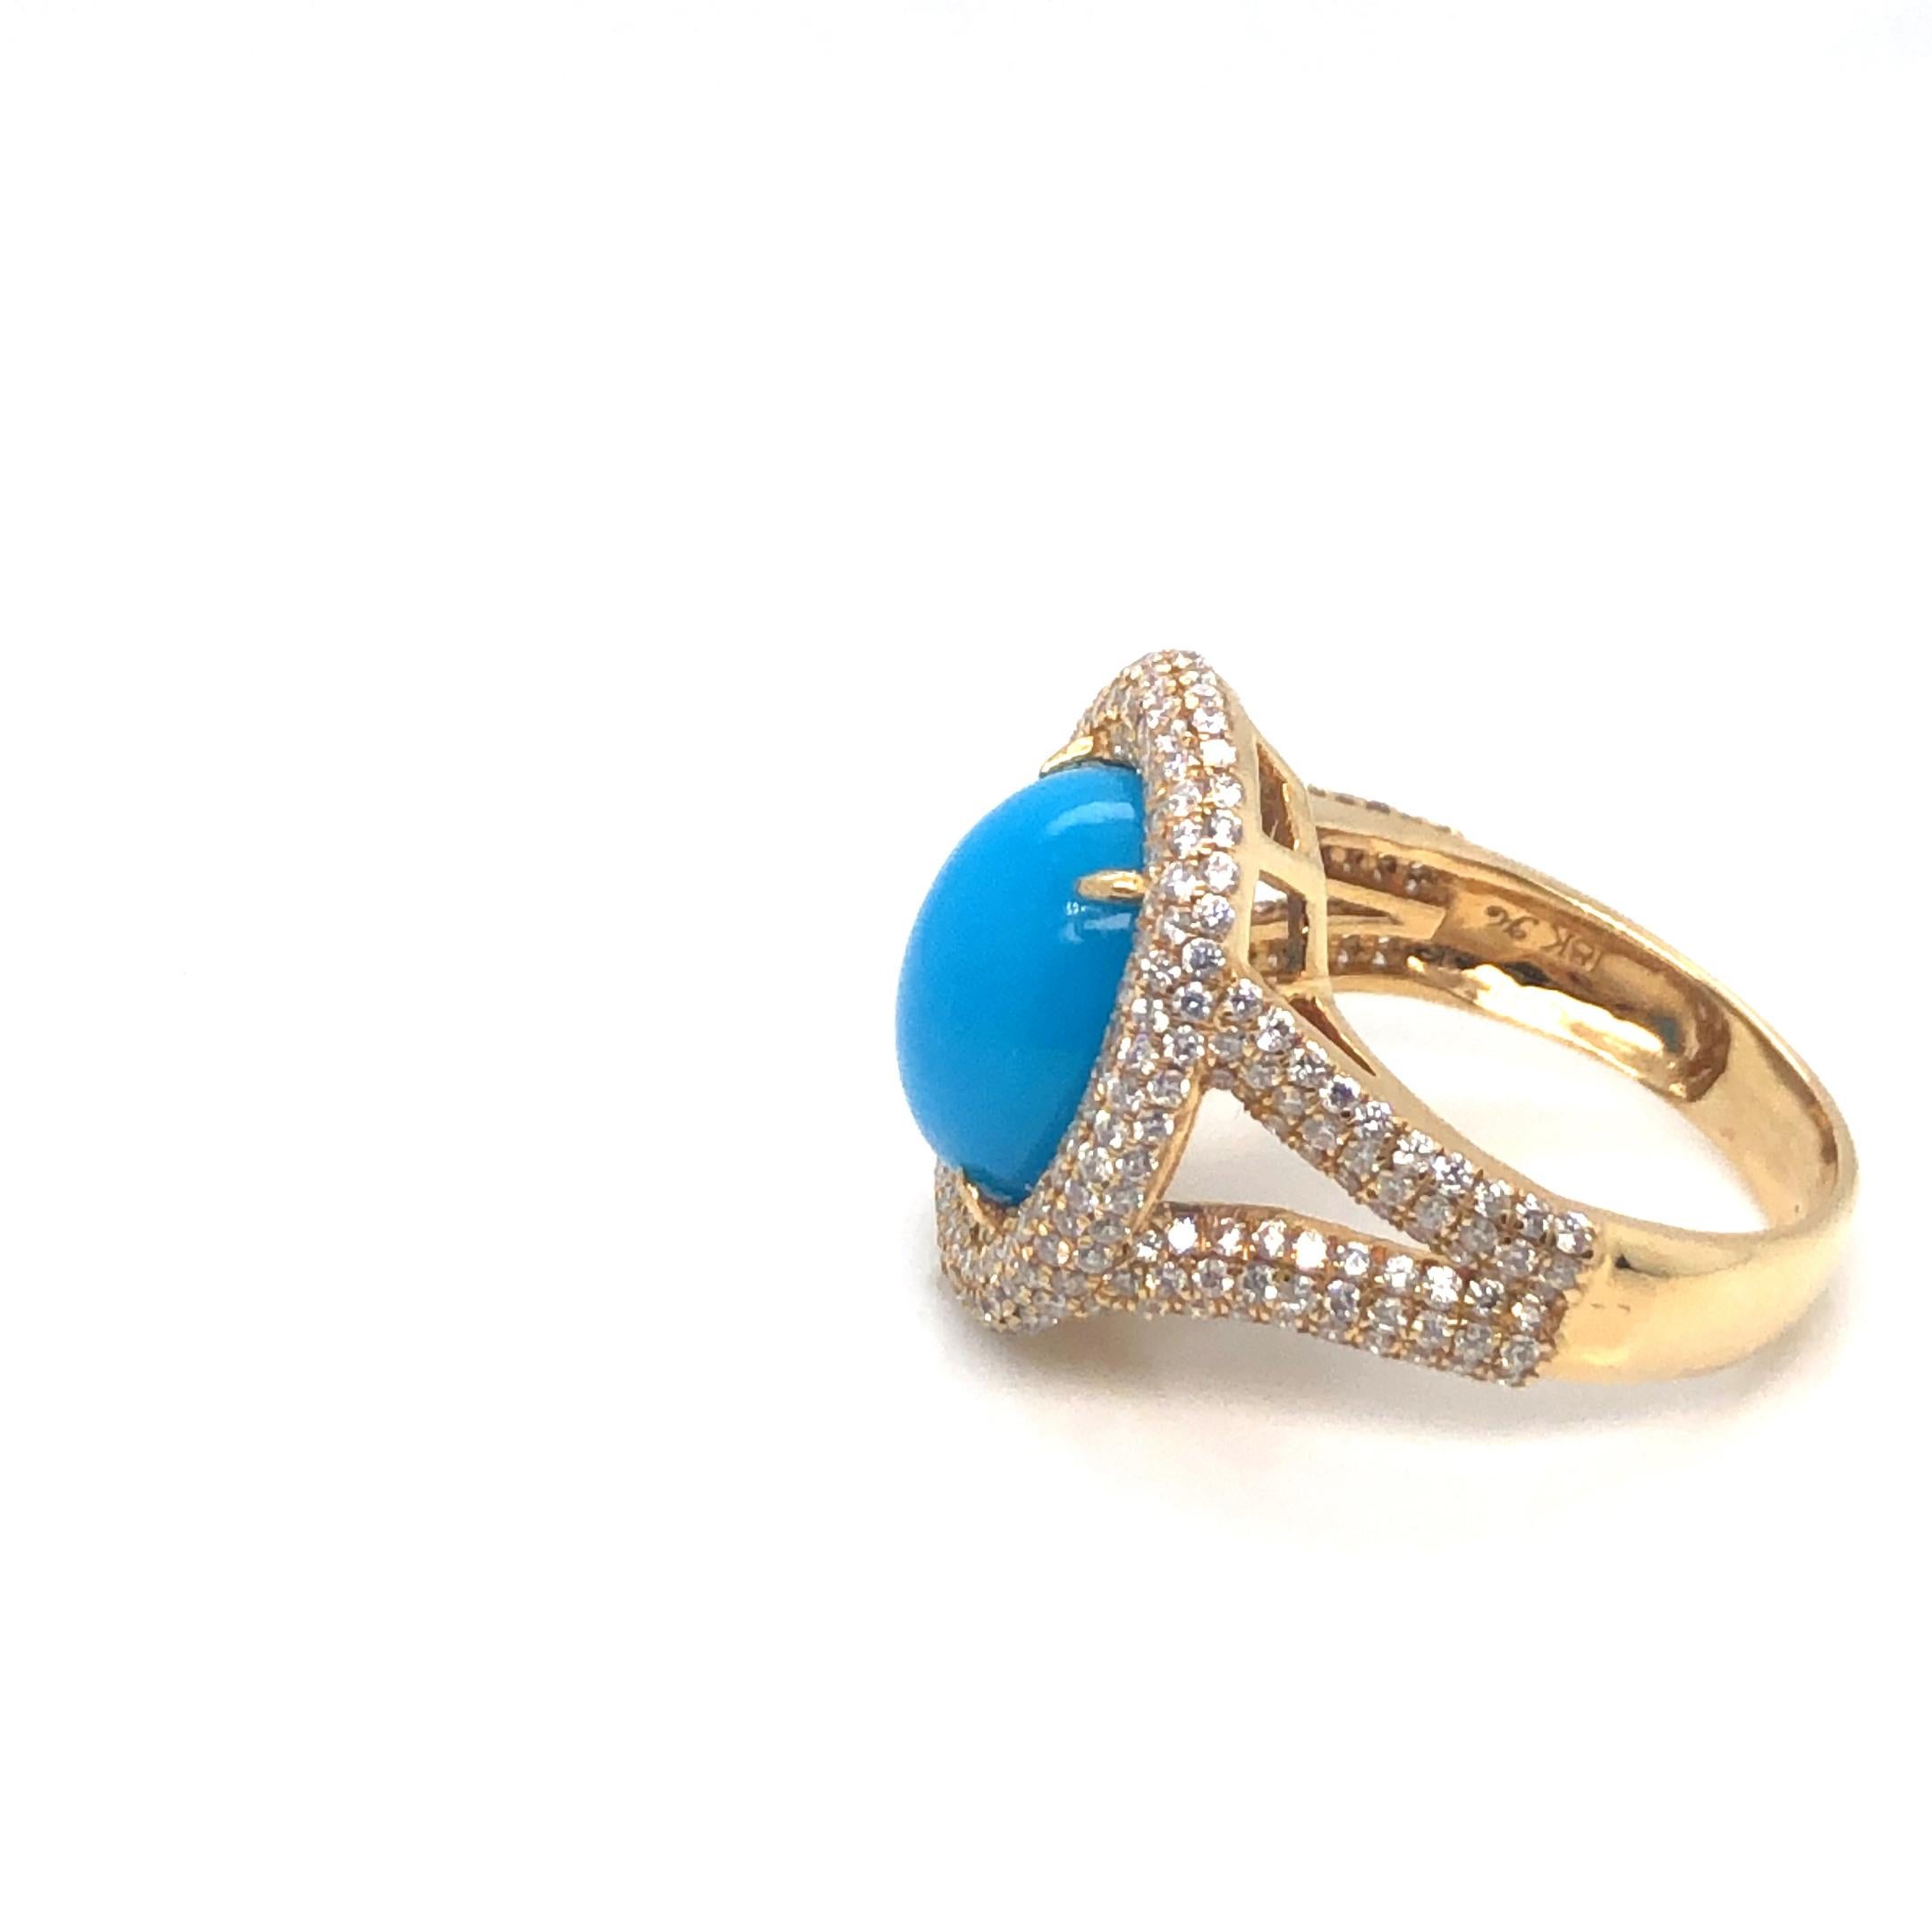 Oval Cut Turquoise And Diamond Ring 18K Yellow Gold For Sale